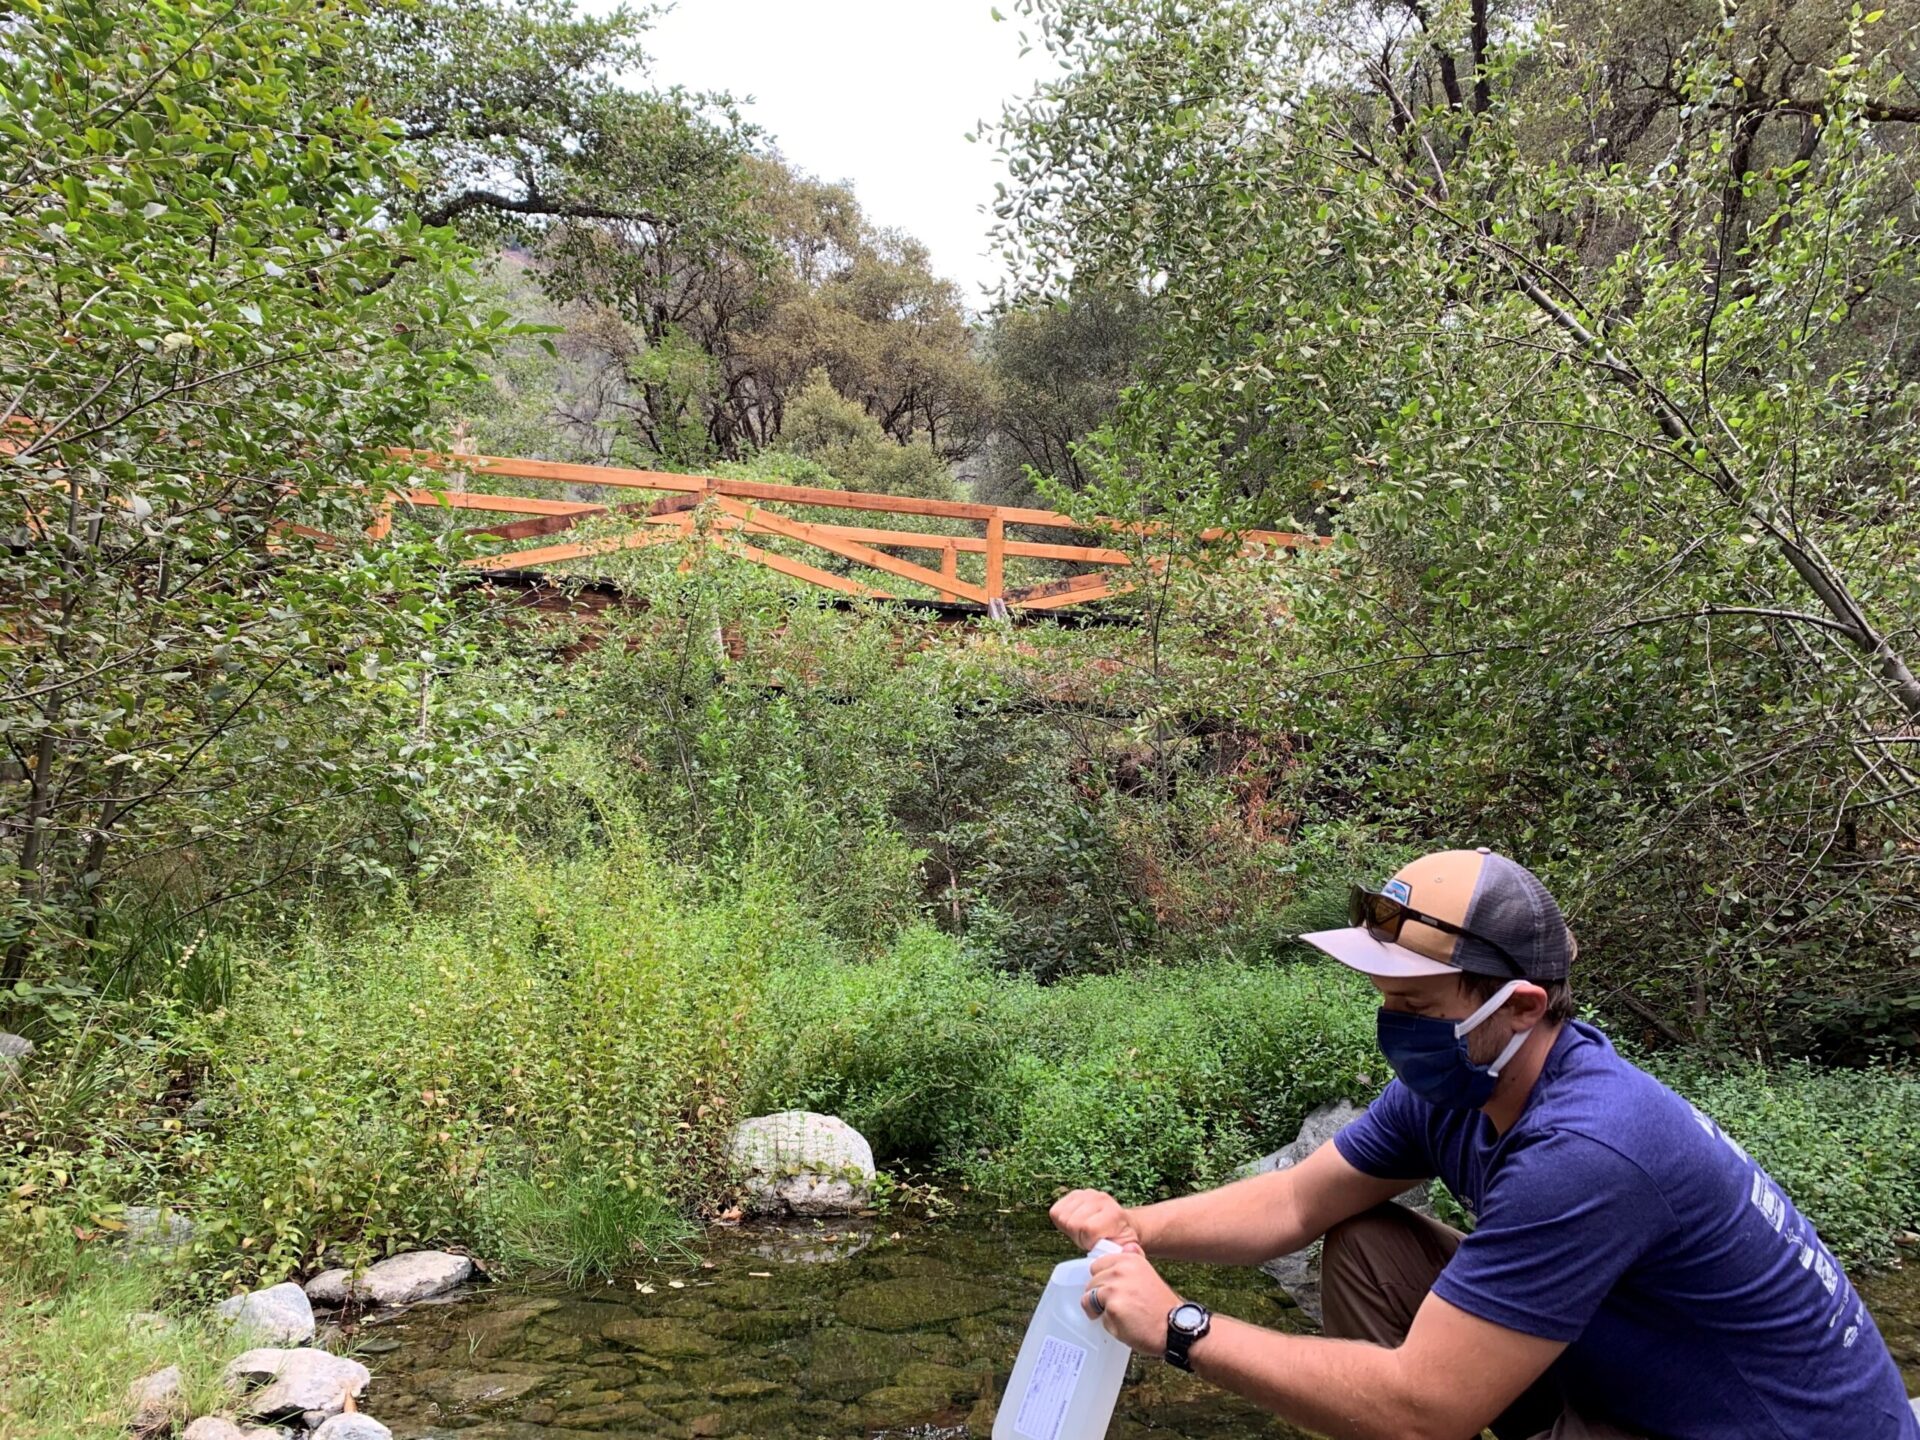 SYRCL Hydrologist, Karl Ronning, conducting River Monitoring at Rush Creek with a mask on